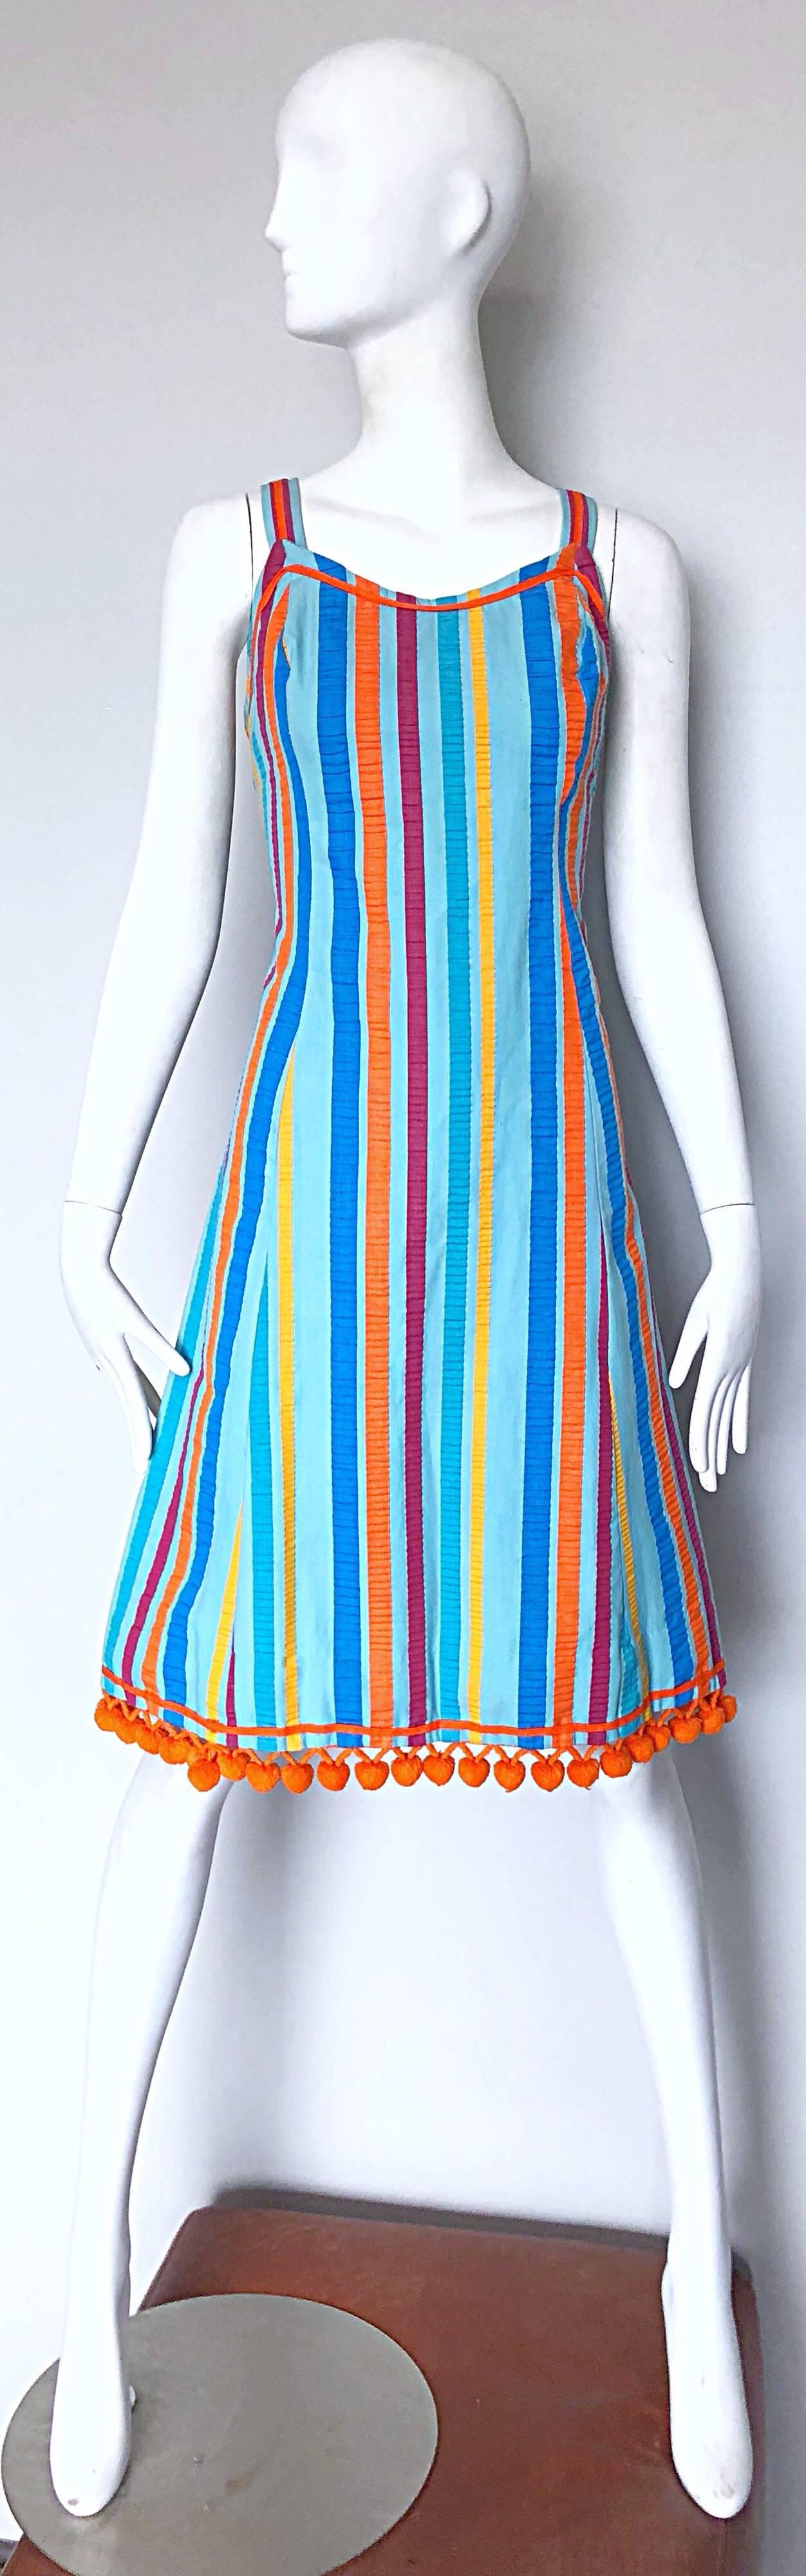 Whimsical 1960s Toby Tanner Colorful Striped ' Pom Pom ' Cotton 60s A Line Dress 1